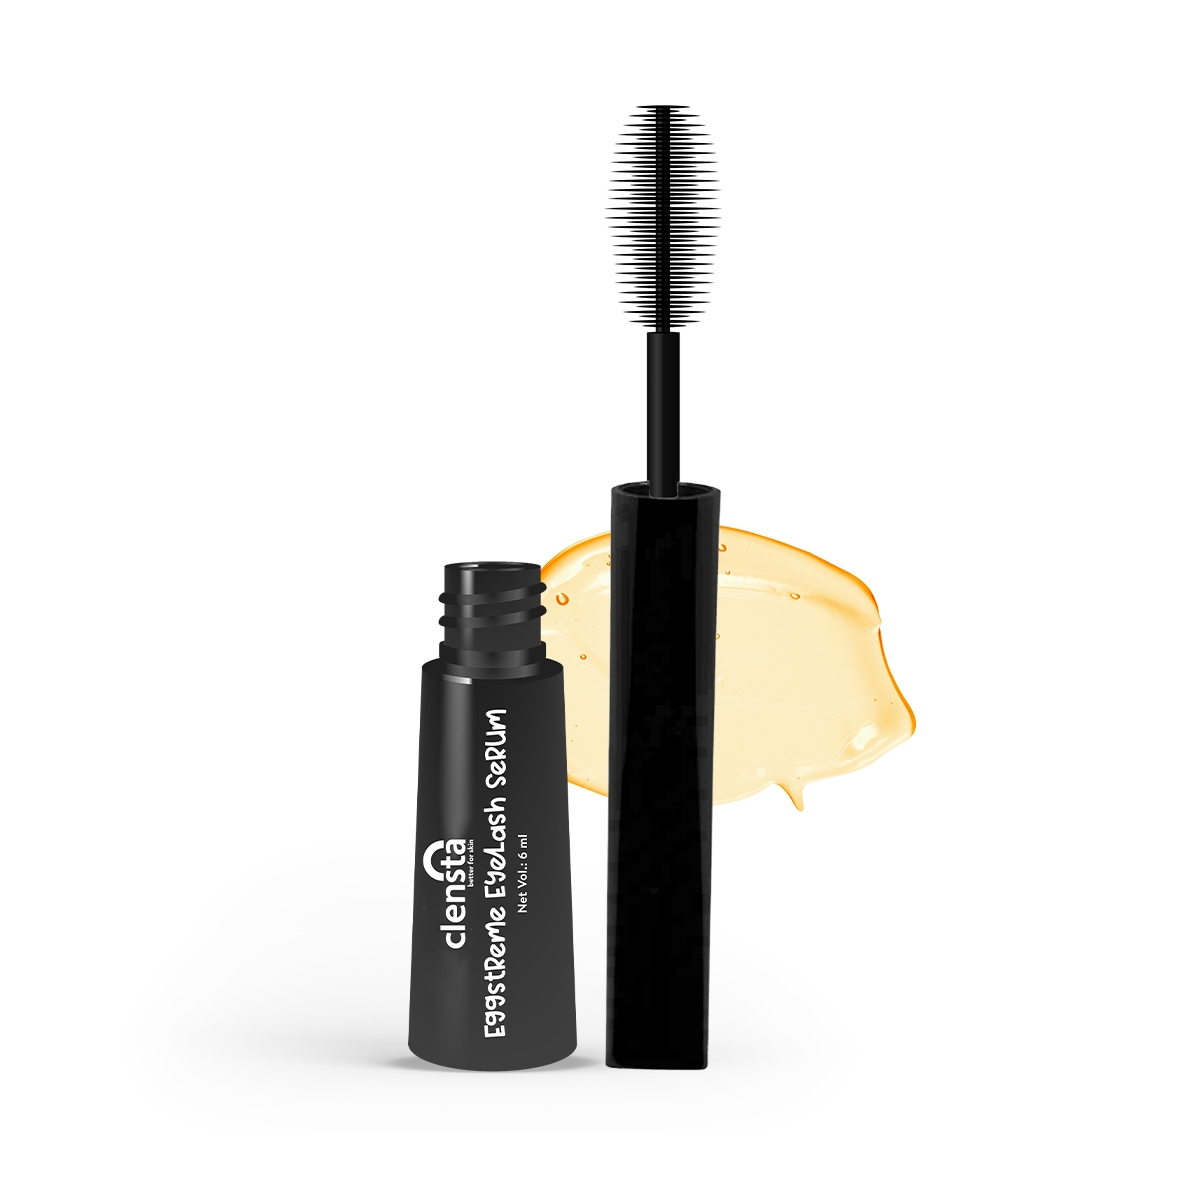 Clensta Eggstreme Eyelash Serum| 6 ml| With Egg Protein, Vitamin E, and Castor Oil| For Thick, Healthy Eyelashes| Naturally Longer, Beautiful lashes| For All Men & Women